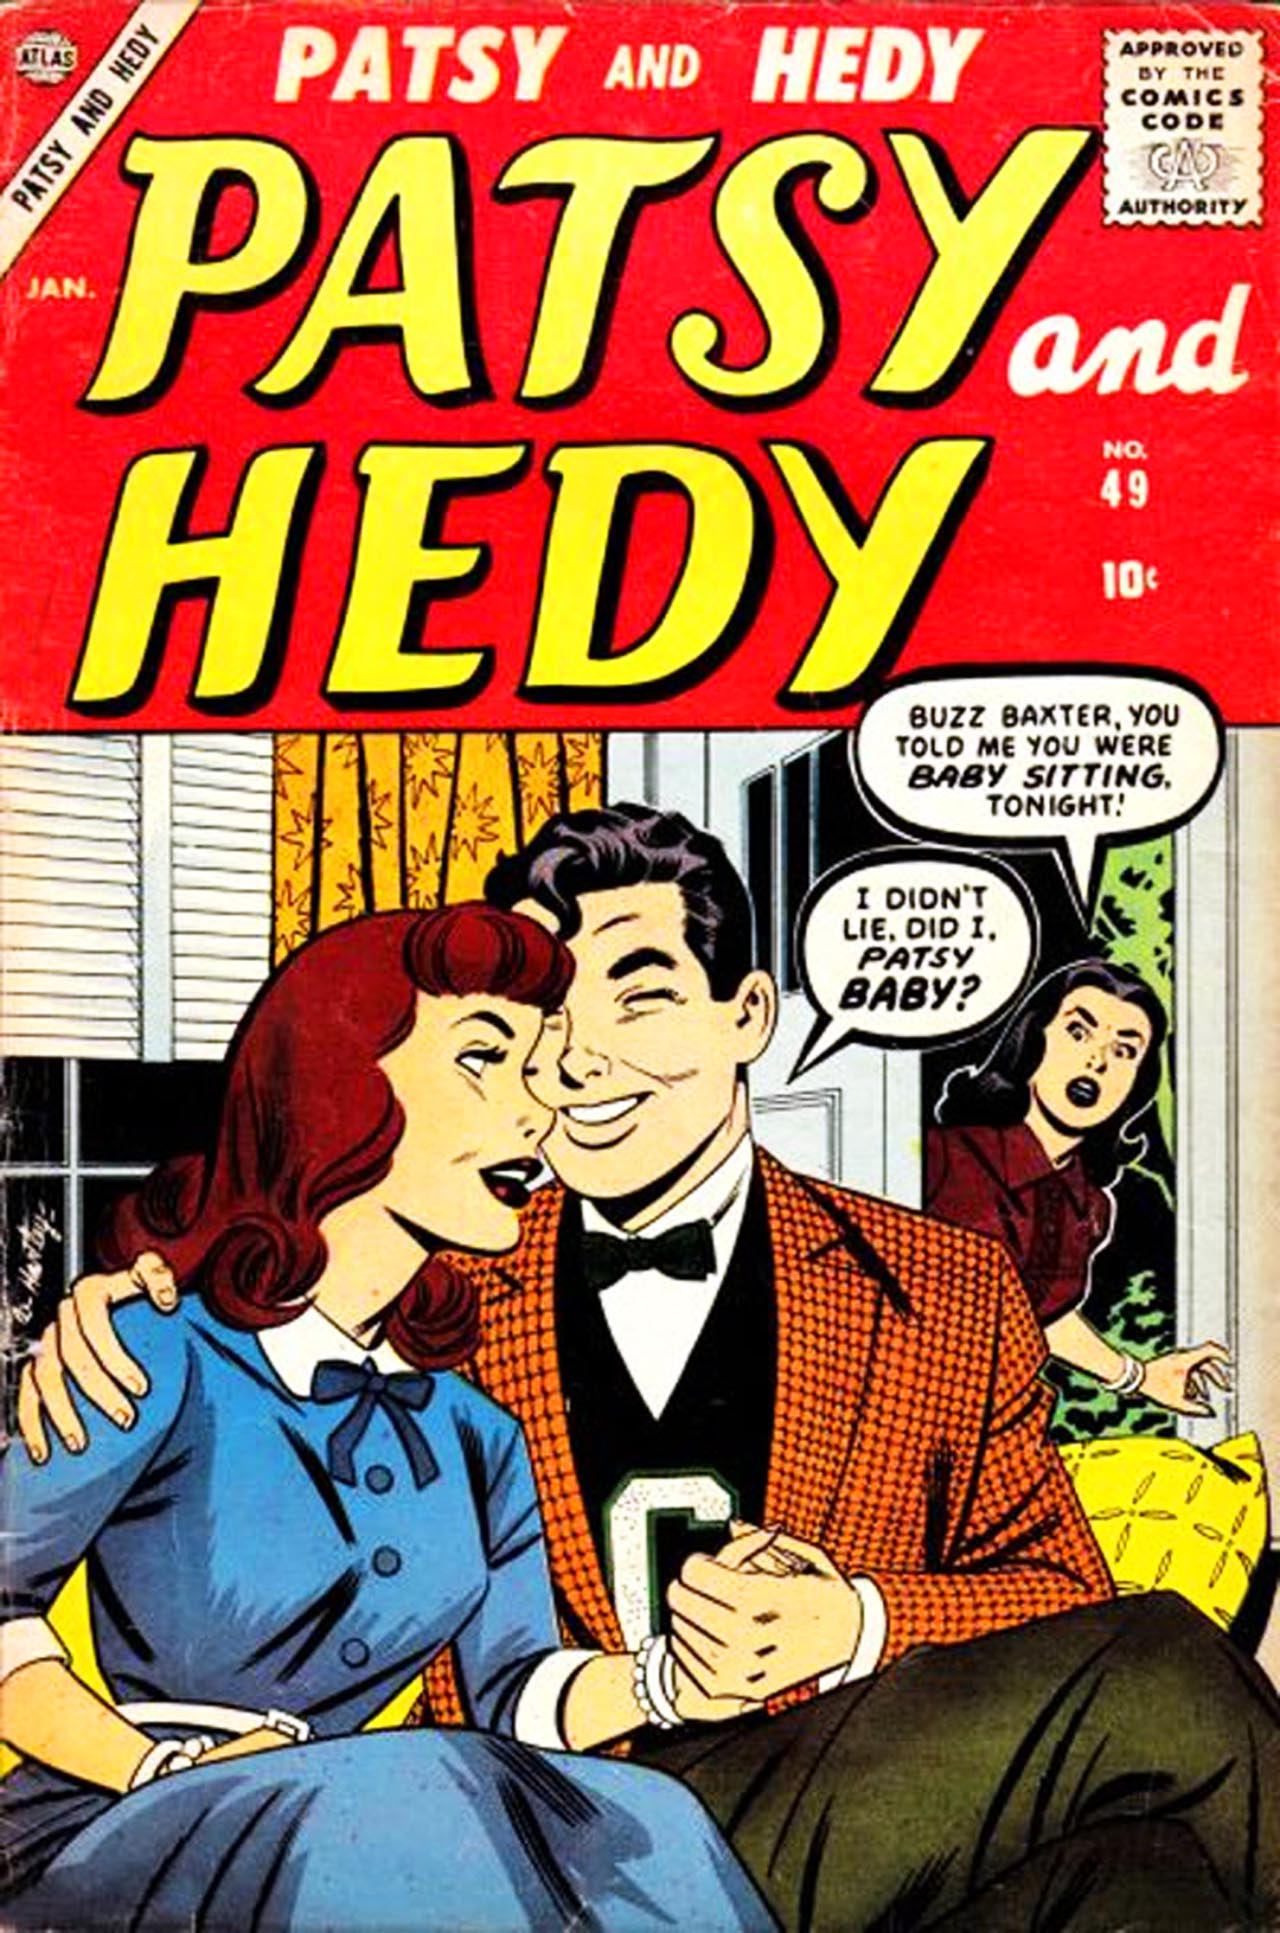 Read online Patsy and Hedy comic -  Issue #49 - 1